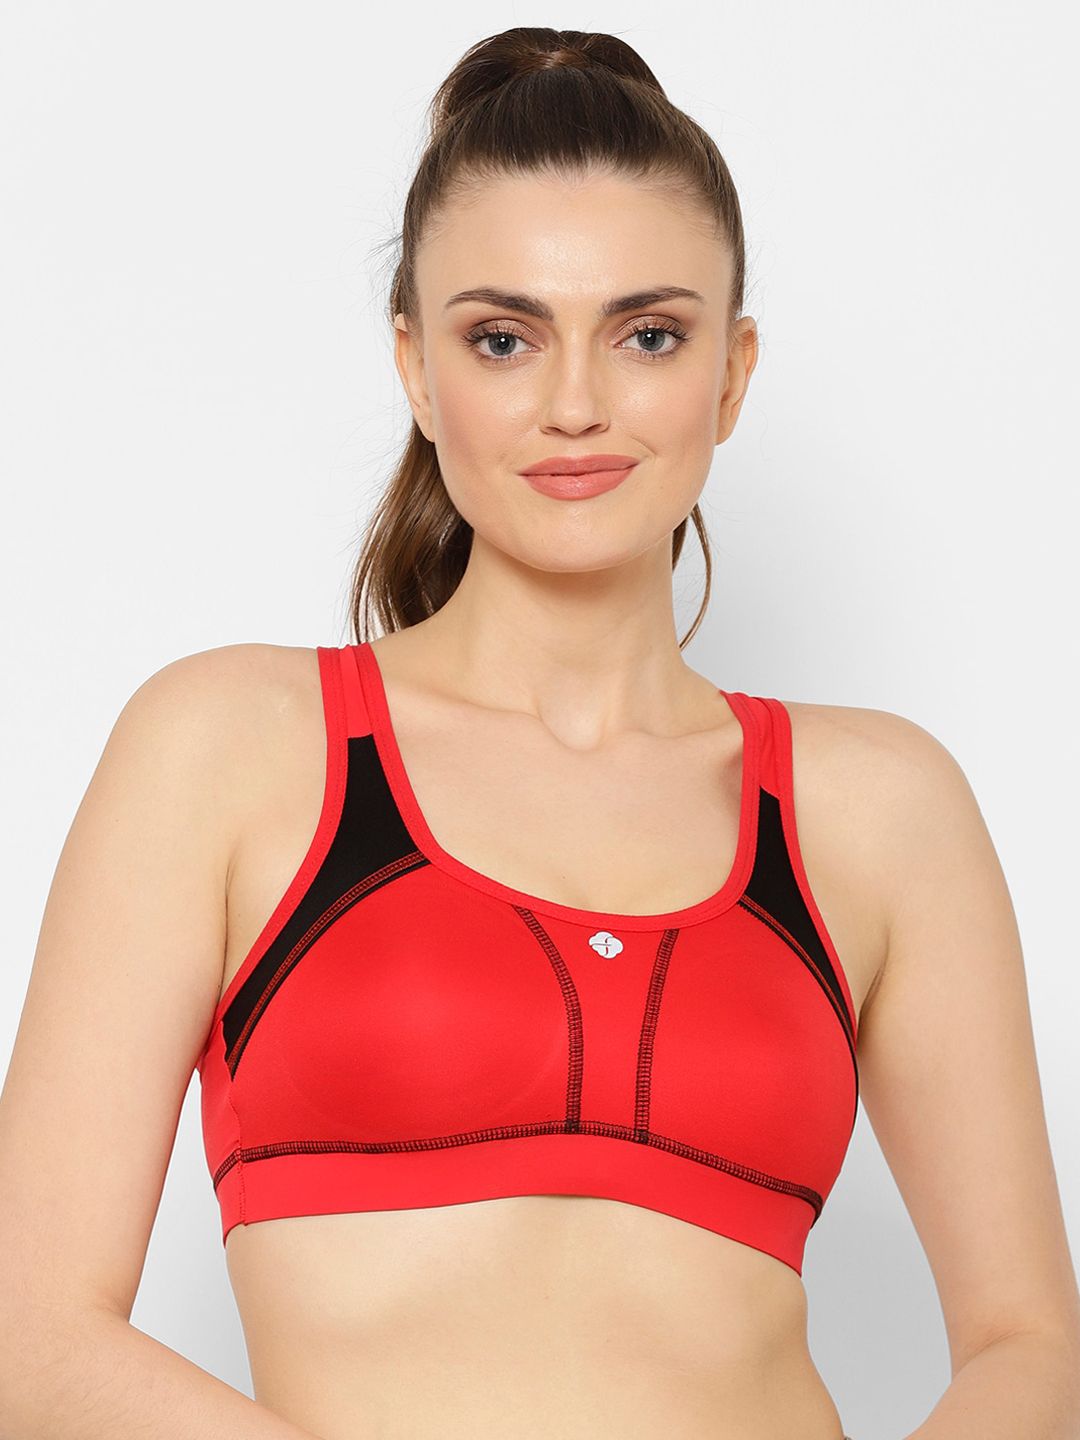 Floret Red & Black Colourblocked Non-Wired Non Padded Workout Bra T3072 Price in India